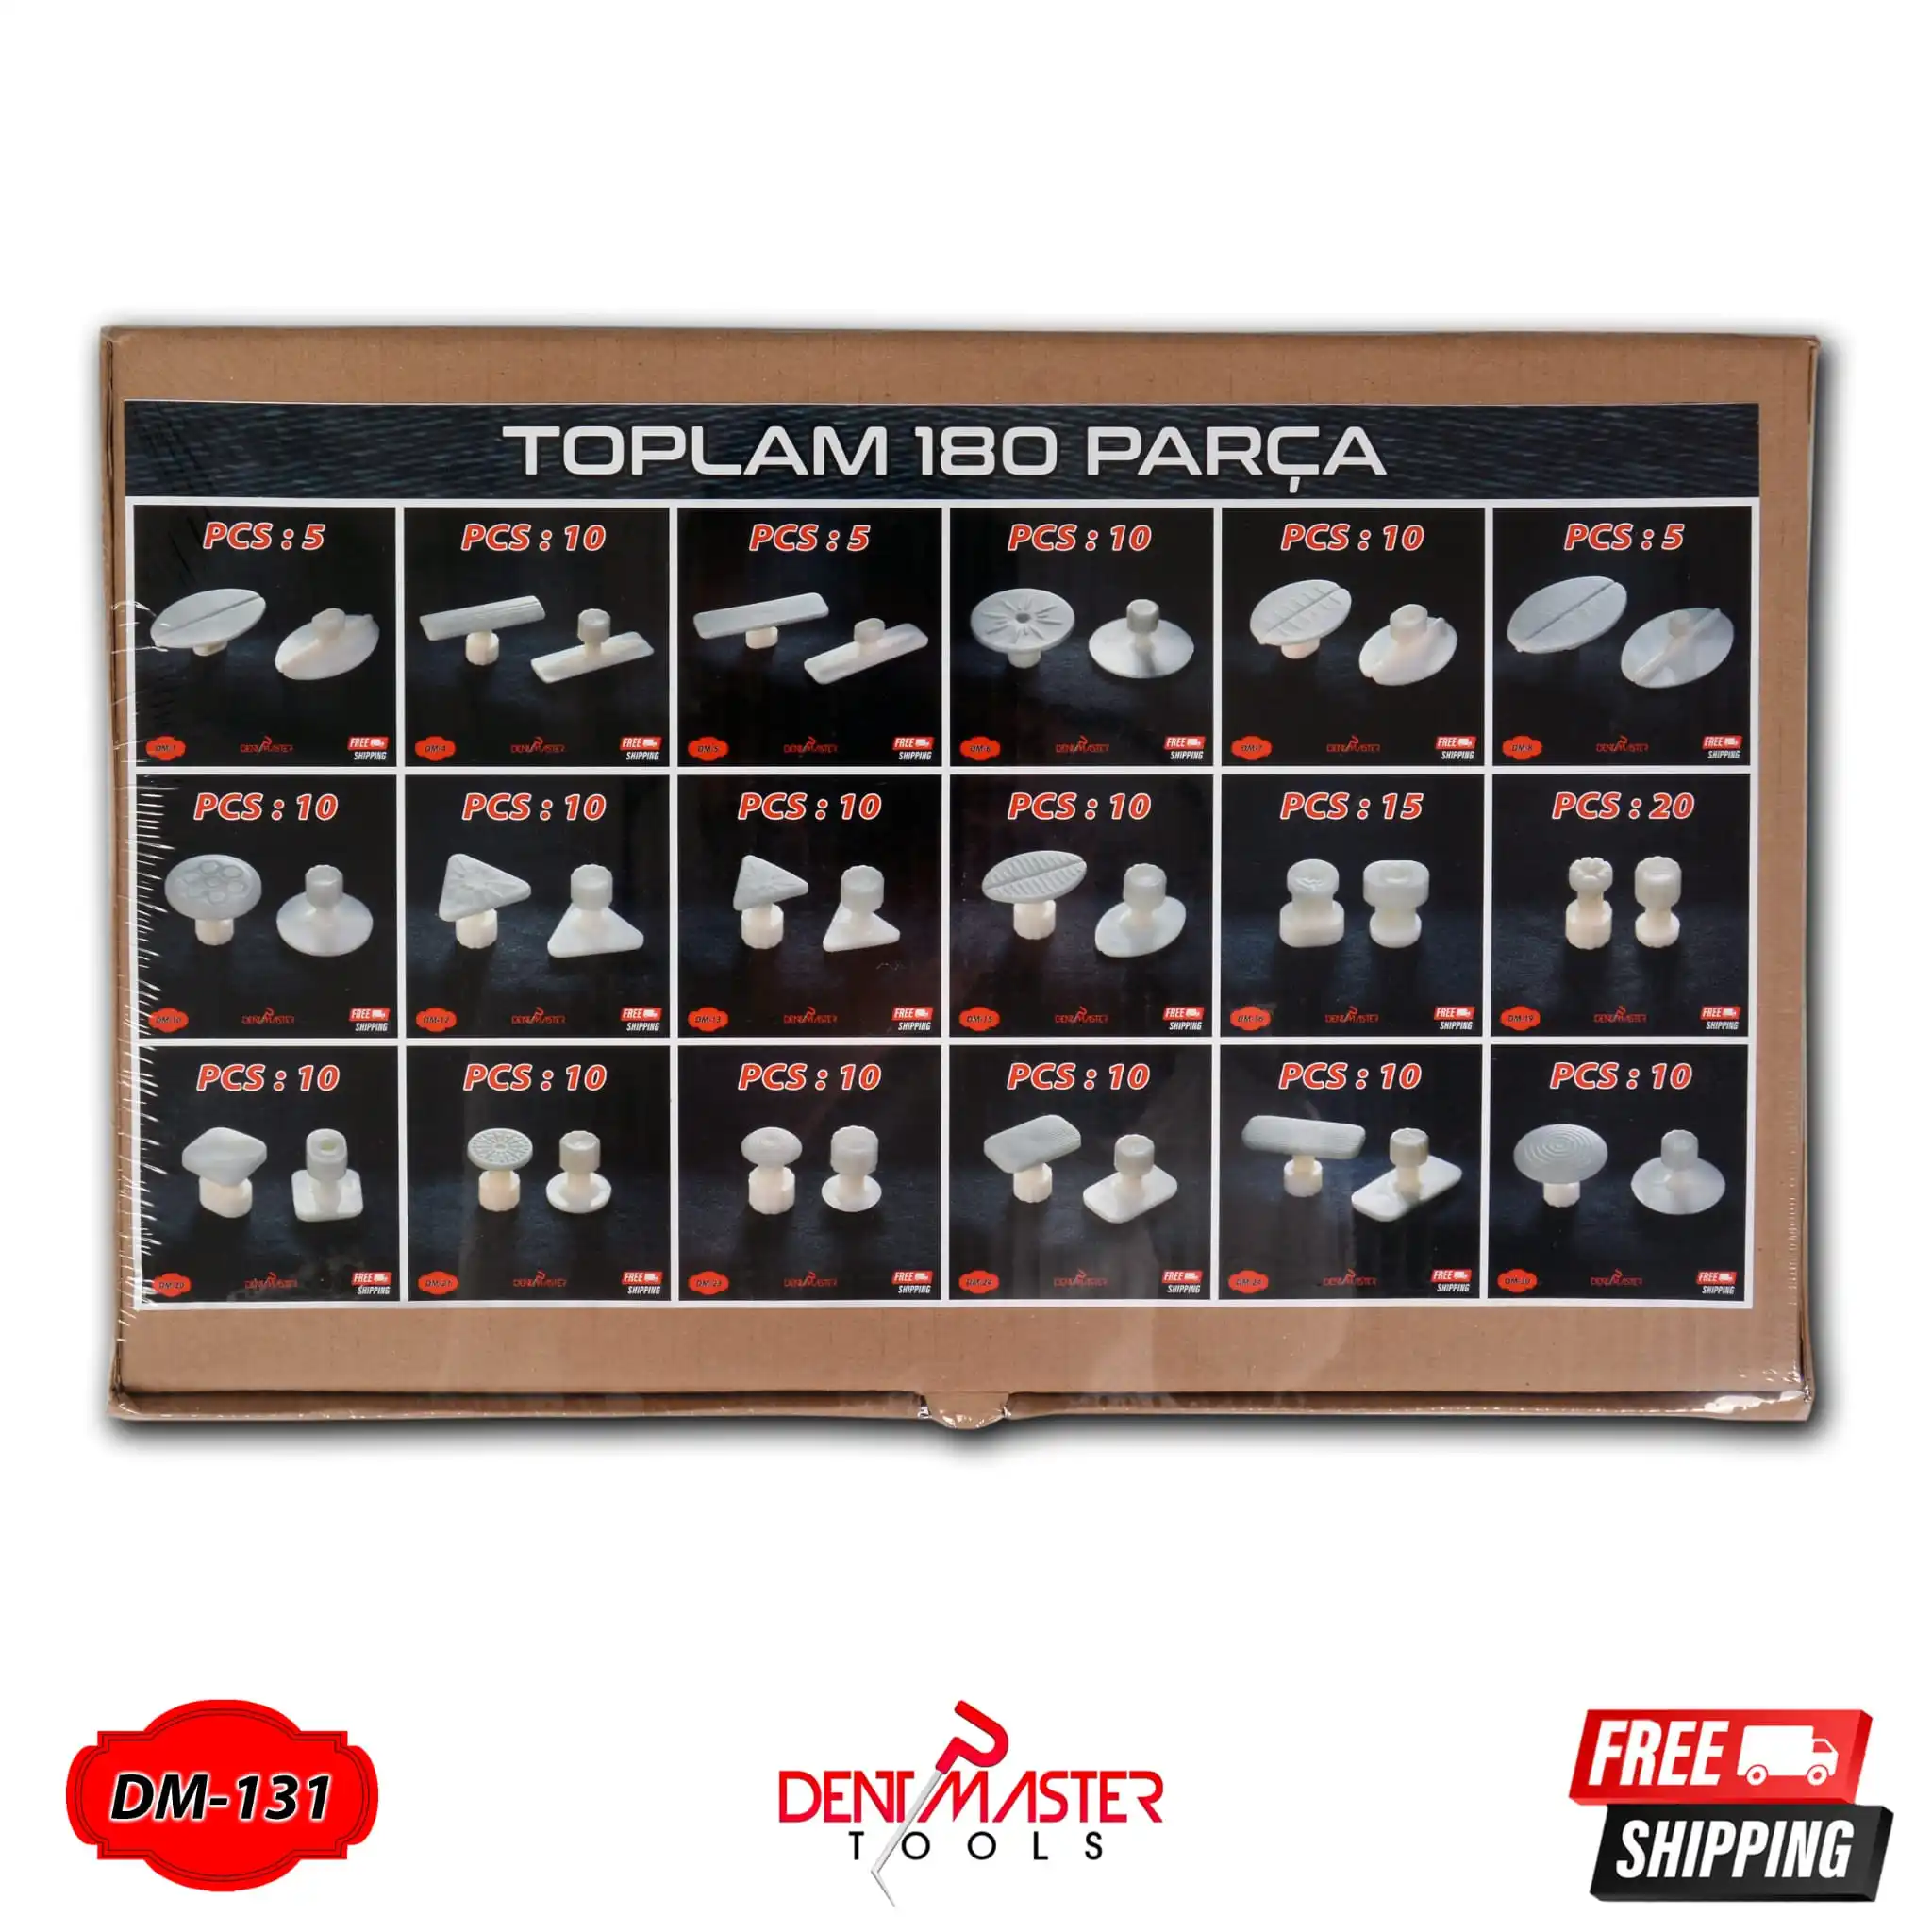 PDR Tools Dent Master Paintless Dent Remover Tools 180 pieces Glue Tabs PDR Tools Paintless Dent Repair Pdr Tools